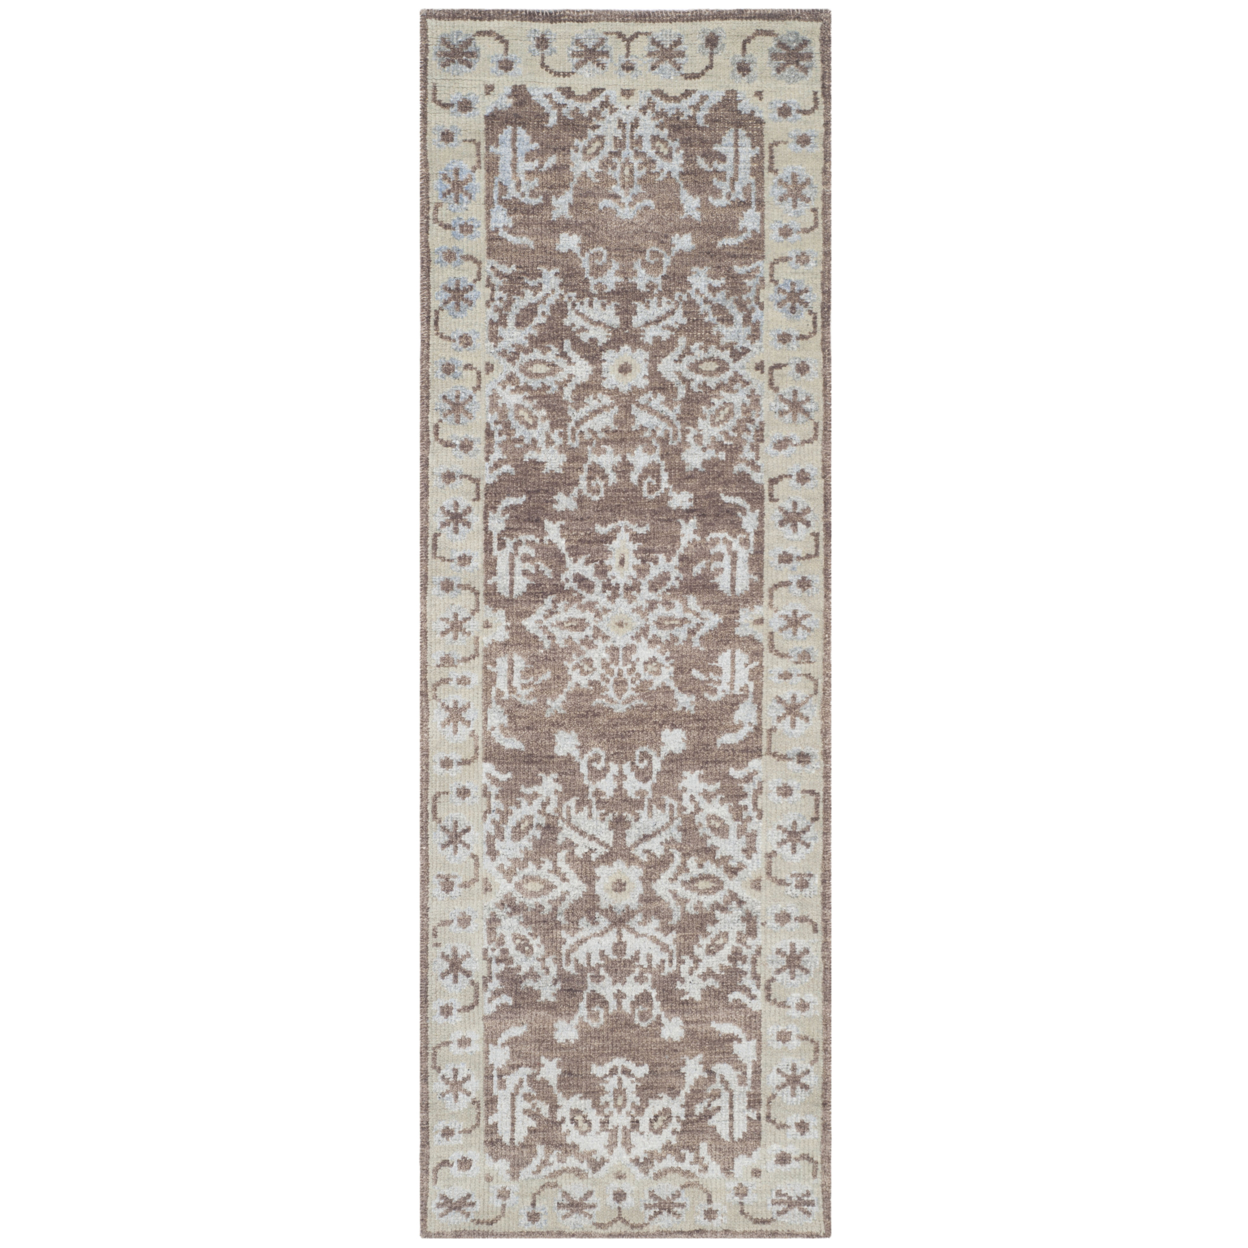 SAFAVIEH Stone Wash STW216A Hand-knotted Charcoal Rug - 2' 6 X 8'